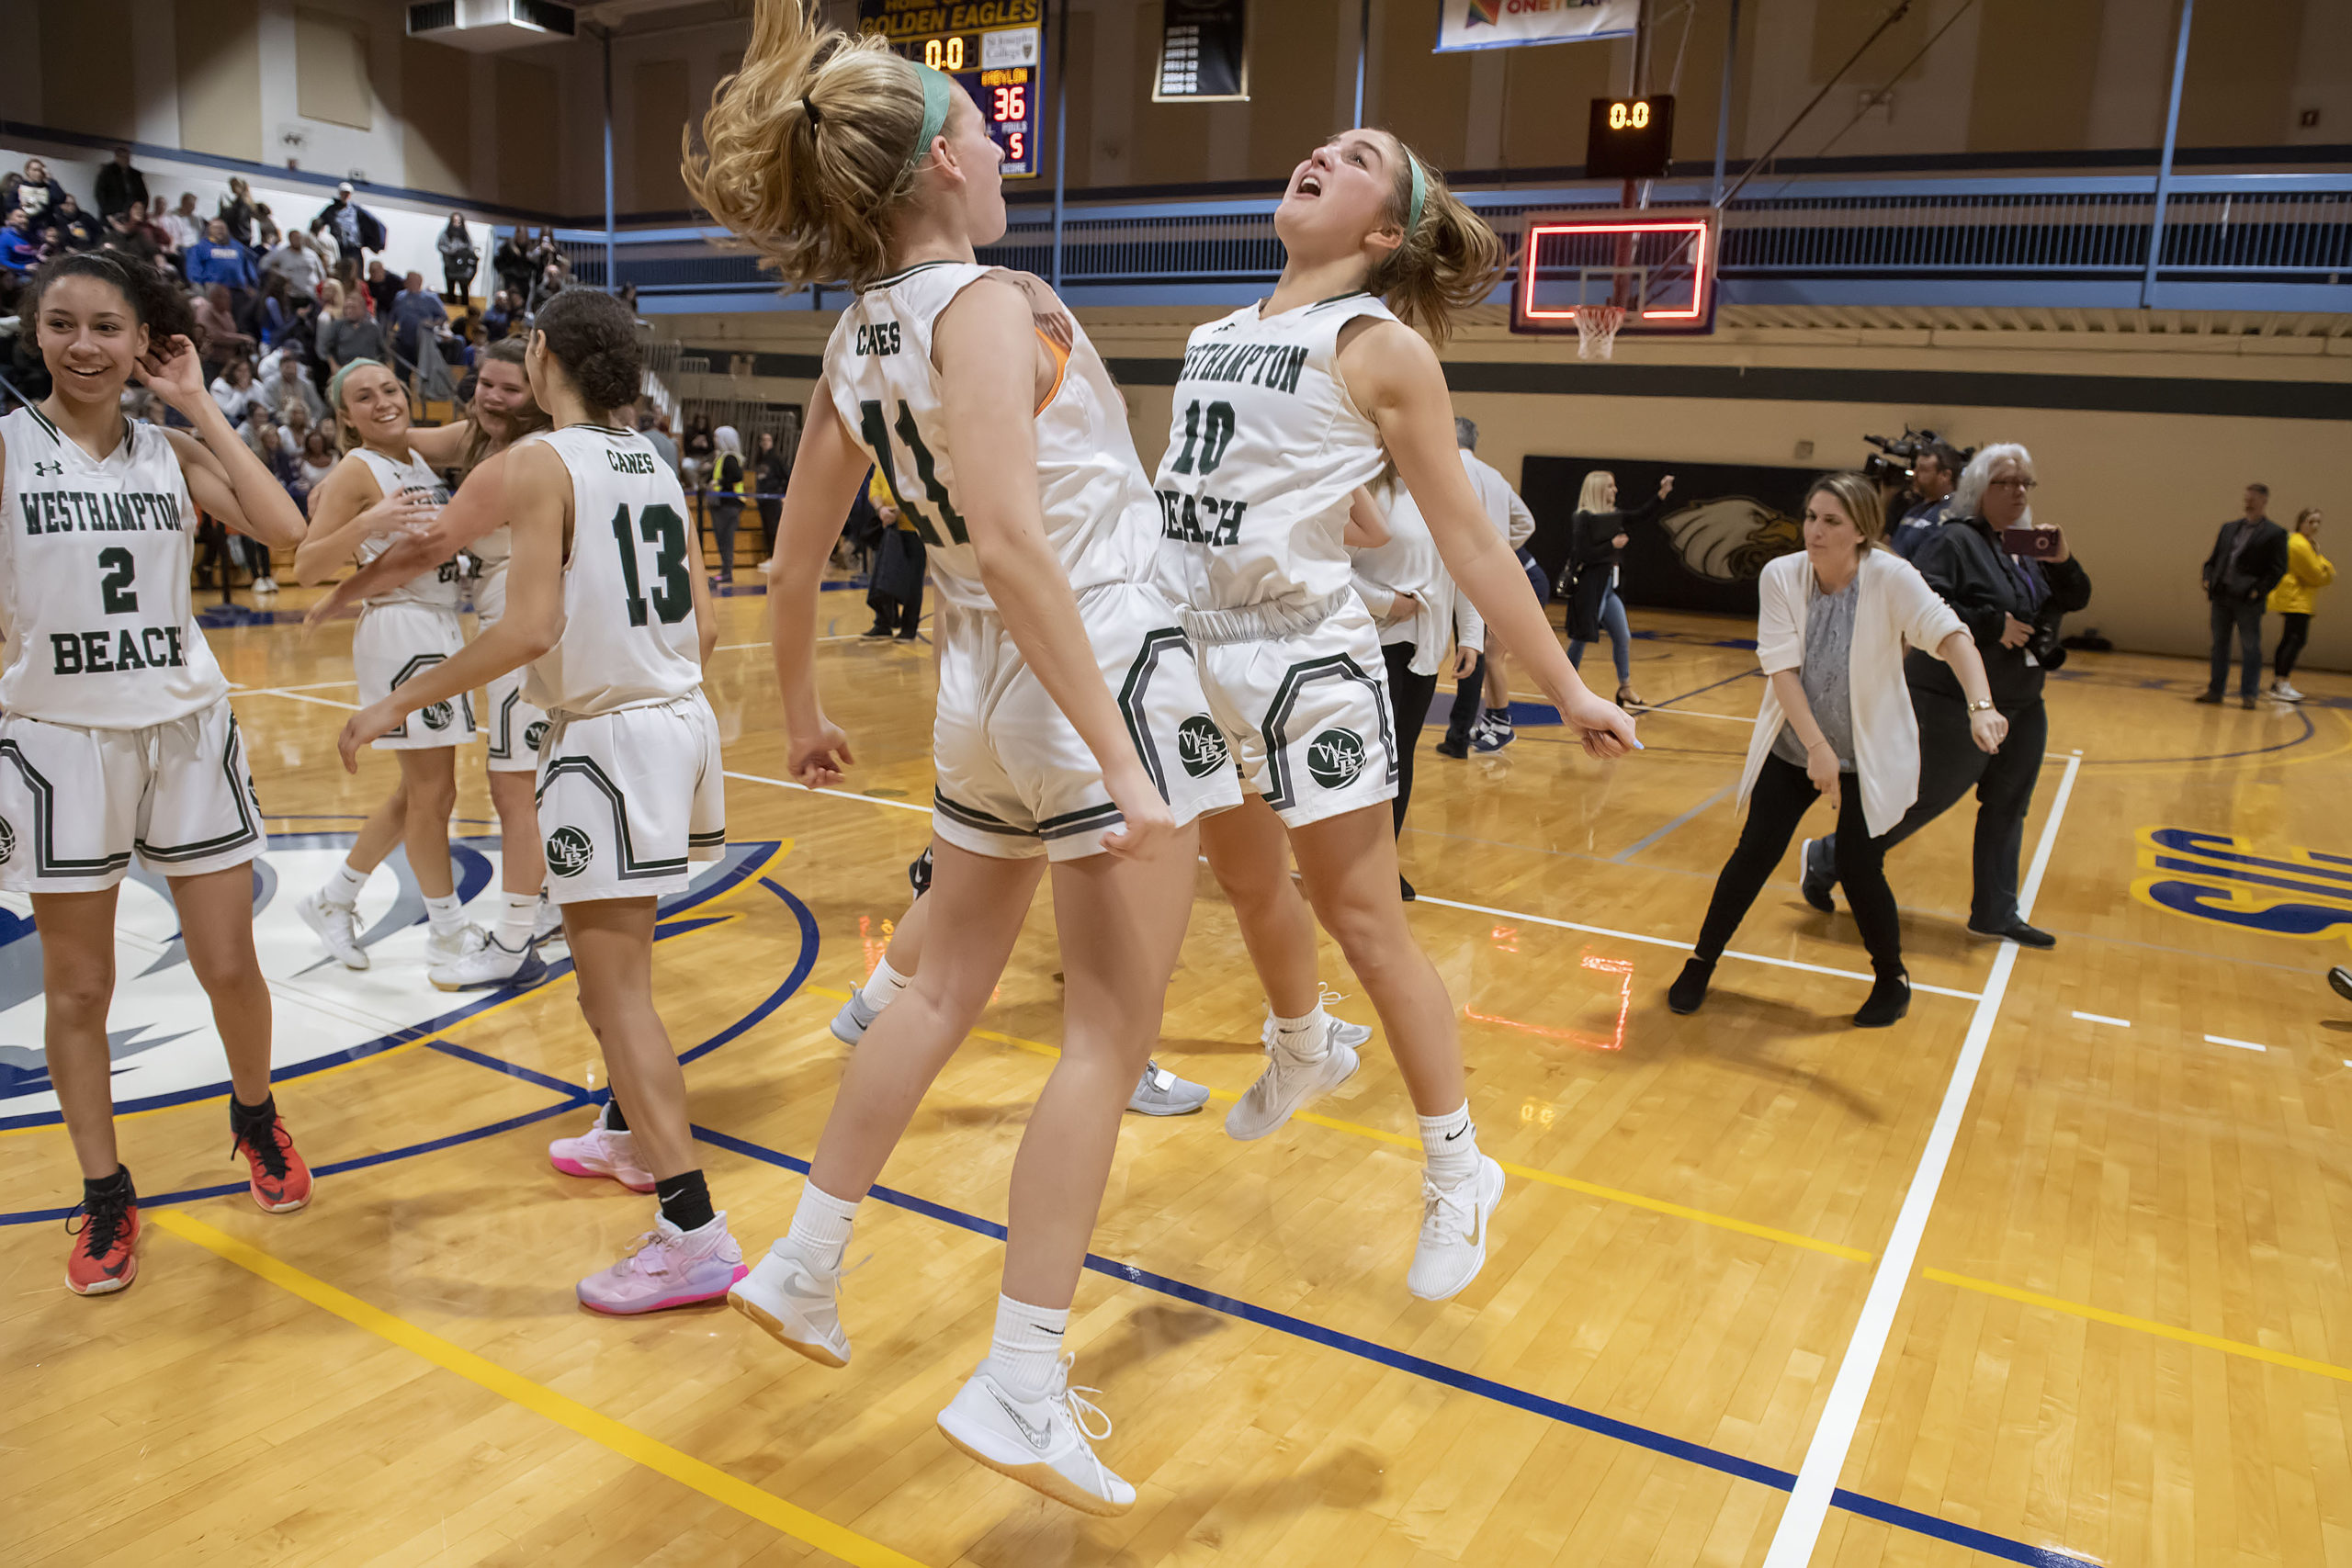 Lady Hurricanes Molly Skorobohaty, left, and Caroline Henke share a chest bump as the final buzzer goes off and marks the end of the county championship game. Westhampton Beach defeated West Babylon, 38-36, at St. Joseph's College in Patchogue on Tuesday night to win its first county title since the 2004-2005 season.  MICHAEL HELLER